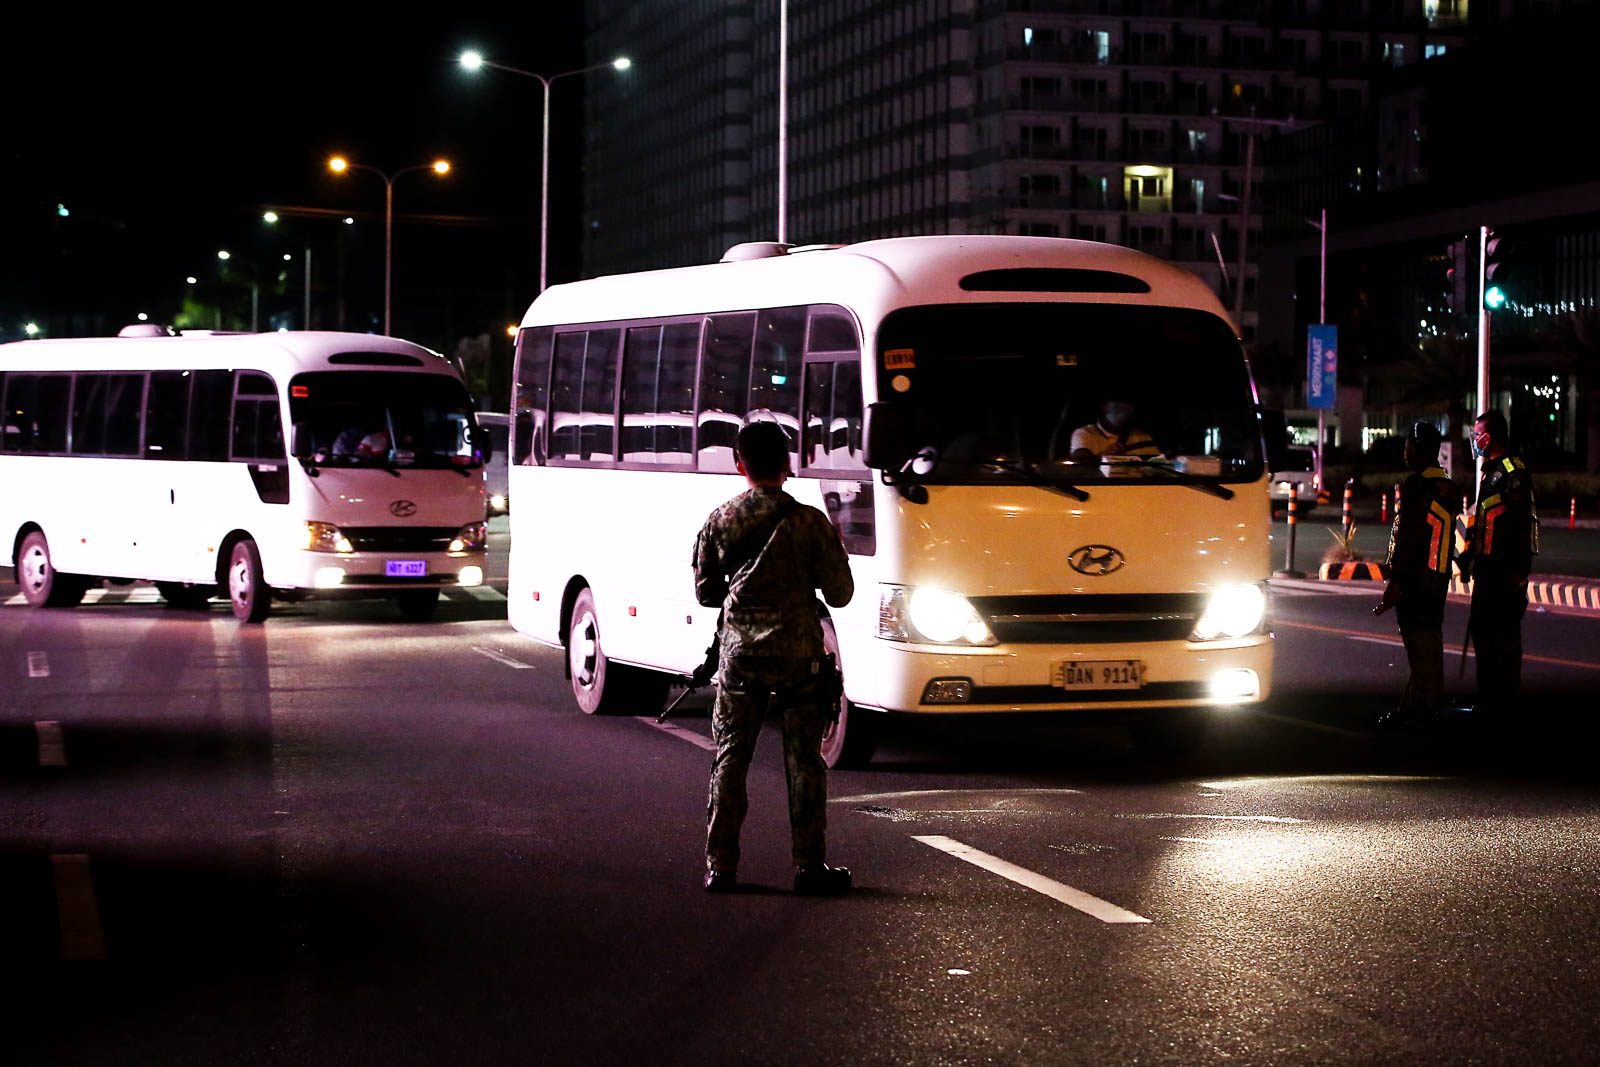 Metro Manila eases curfew hours for May